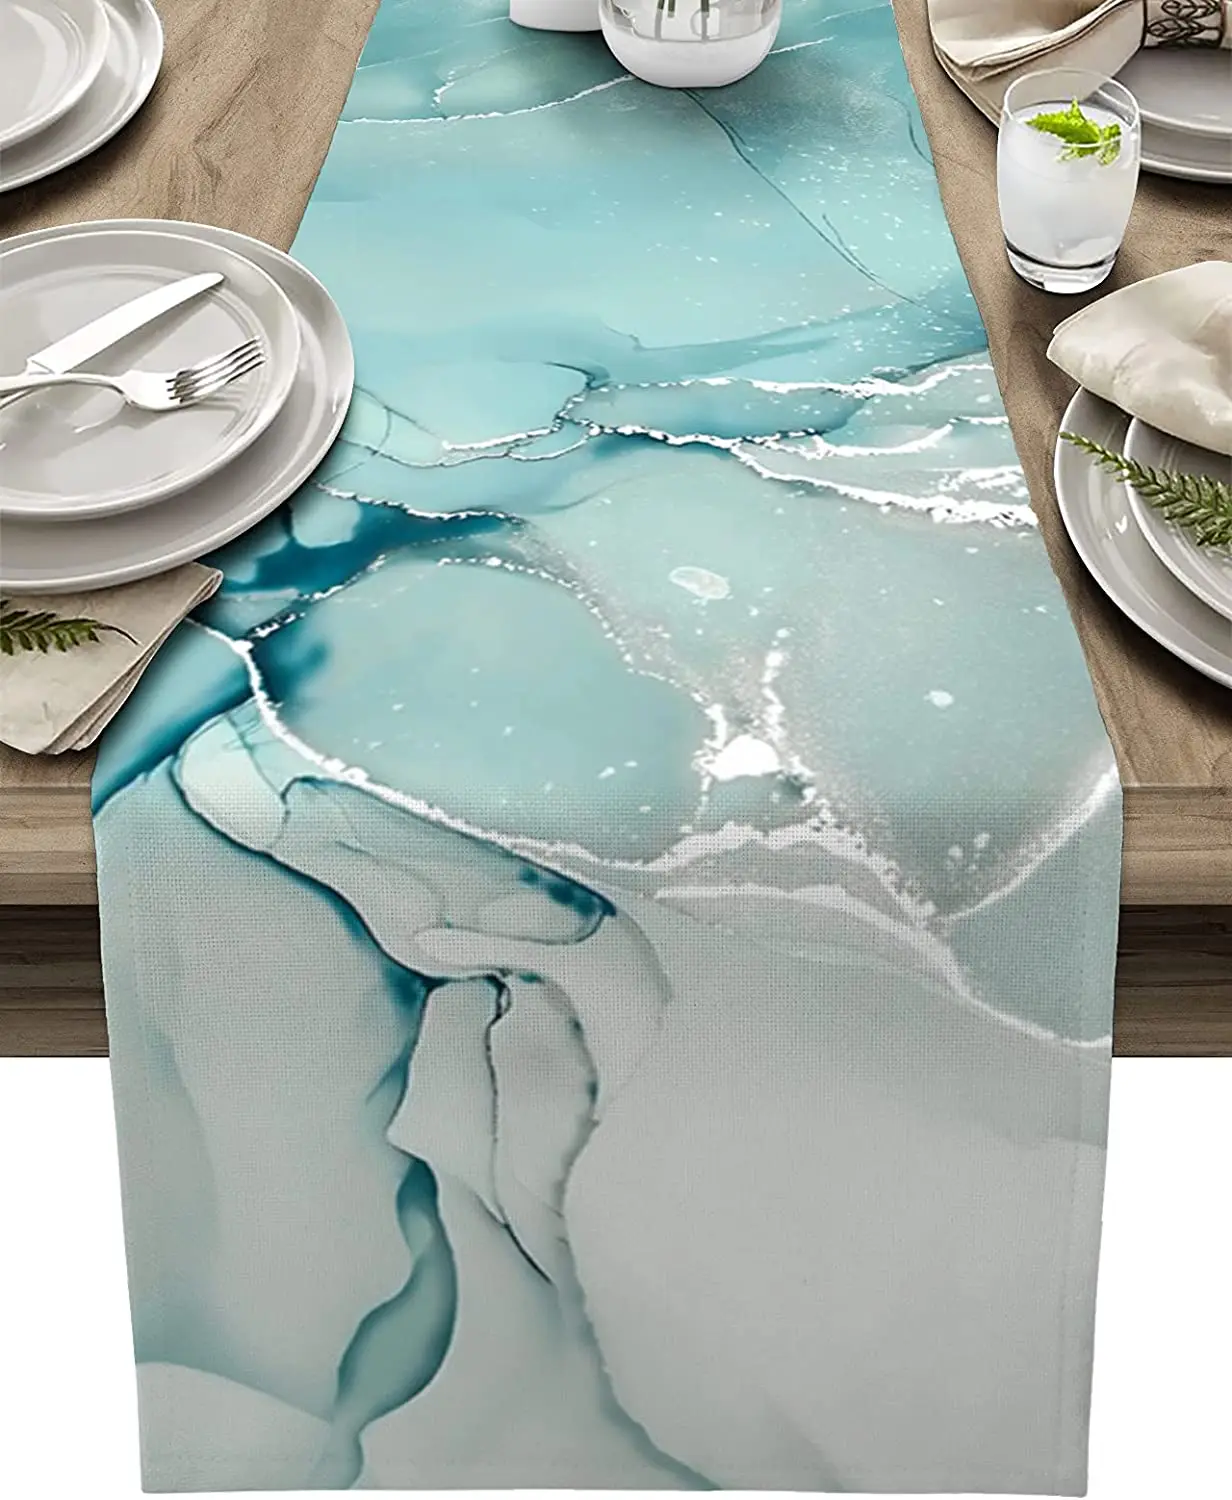 

Marble Turquoise Teal Aqua Linen Table Runner Kitchen Table Runners Decor Dresser Dining Table Runners Holiday Party Decorations